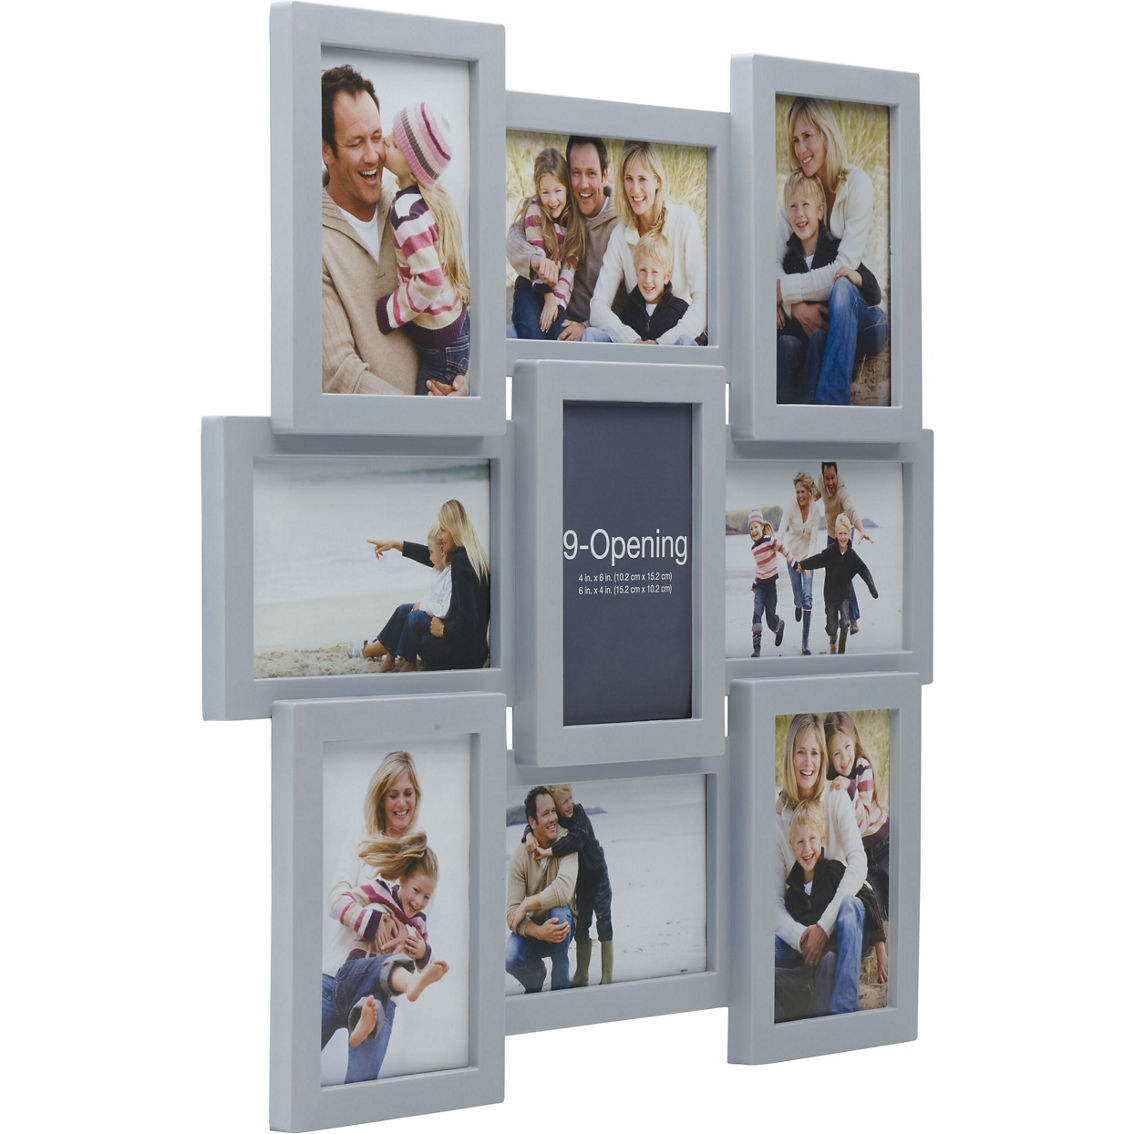 Melannco 18 x 18 in. Gray 9 Opening Photo Collage Frame - Image 2 of 5